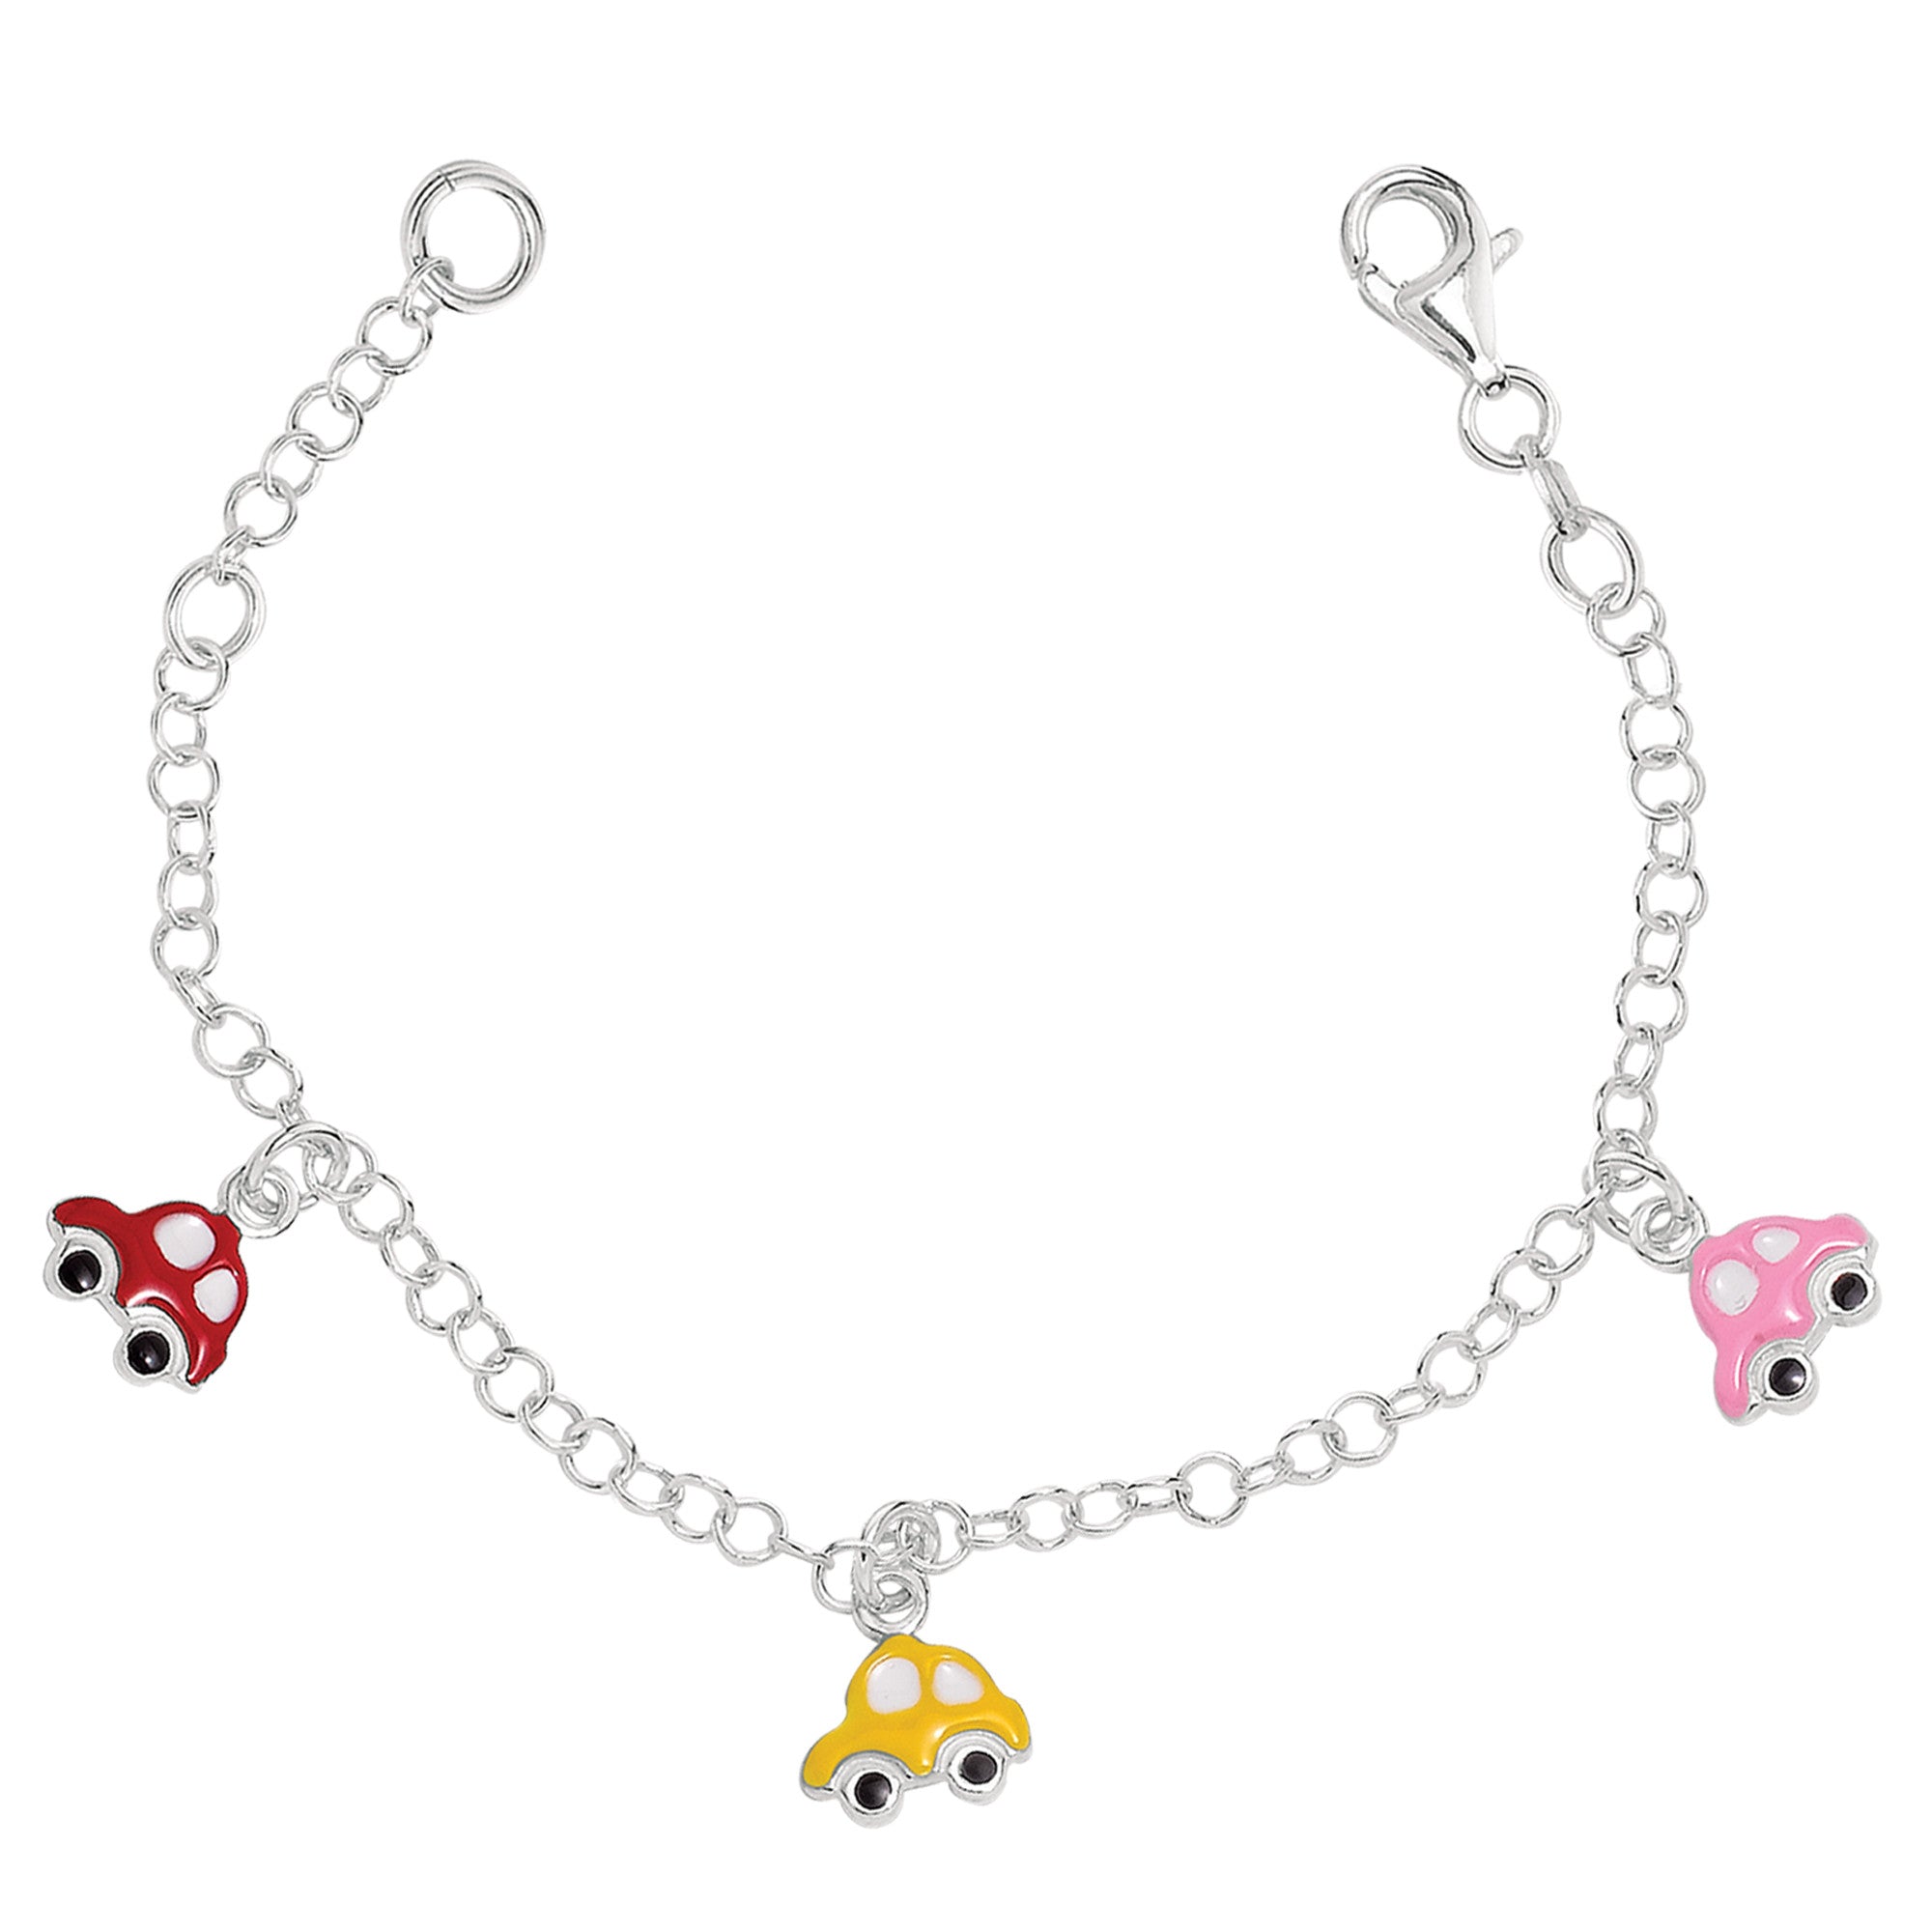 Baby Bracelet With Colorful Dangling Car Charms In Sterling Silver - 6 Inches fine designer jewelry for men and women